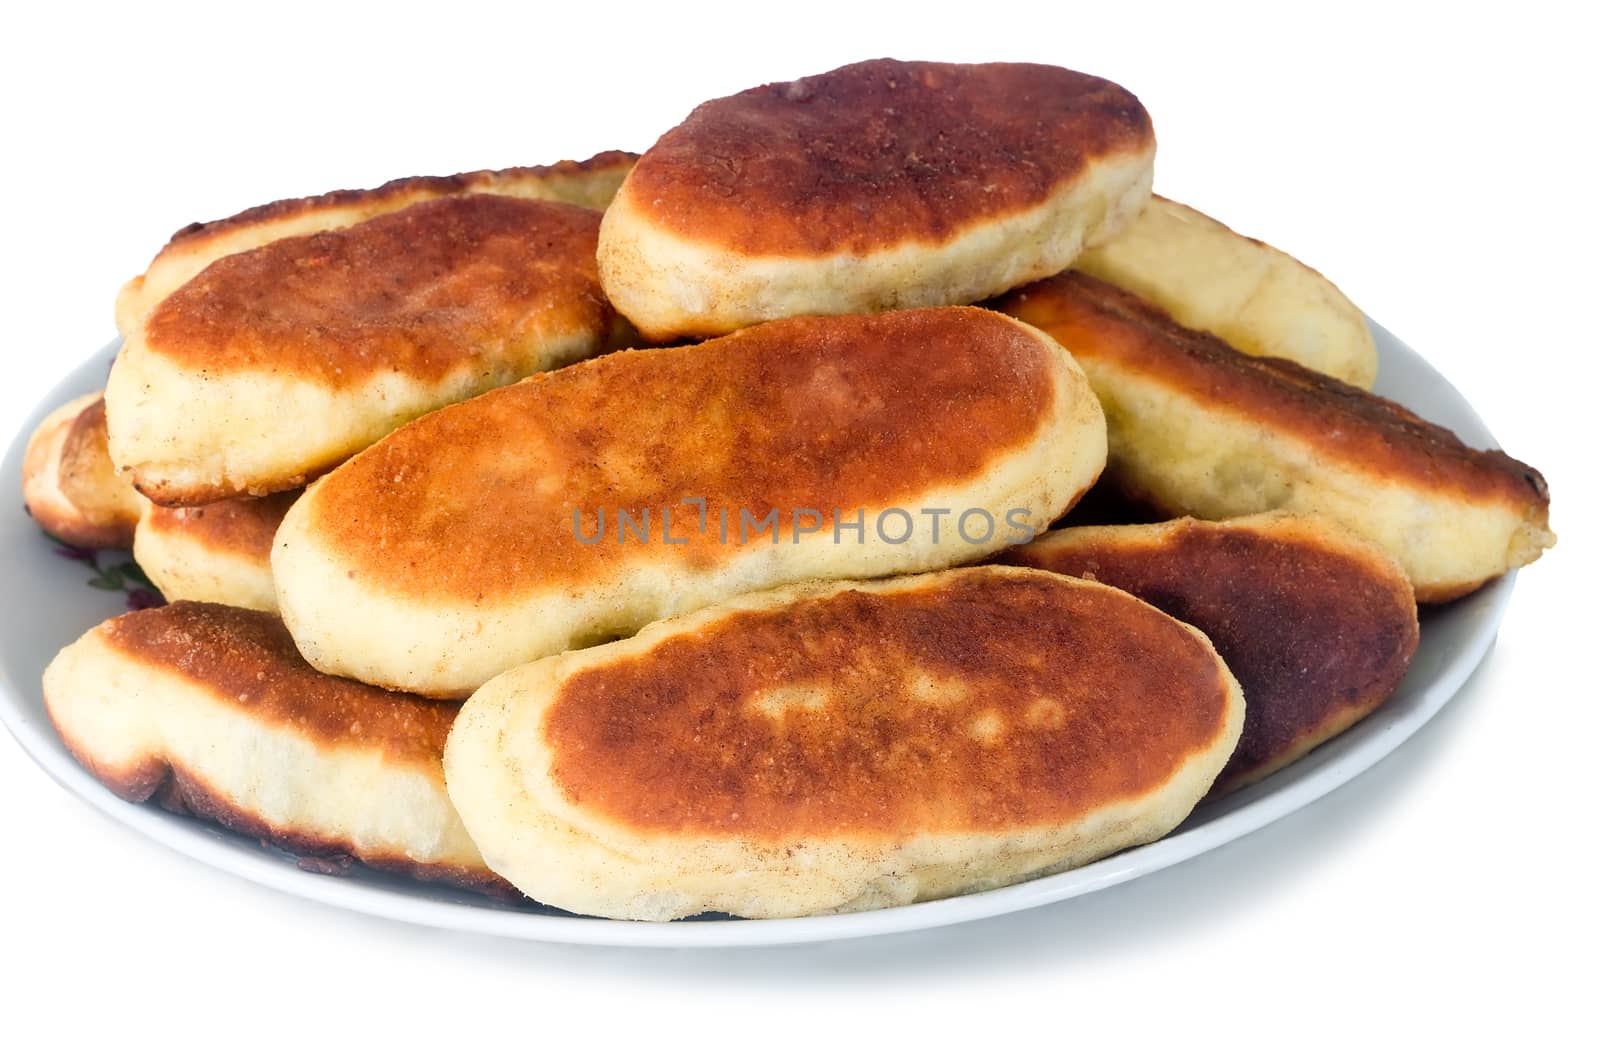 Mouth-watering freshly baked pies on a white ceramic dish. Presented on a white background.